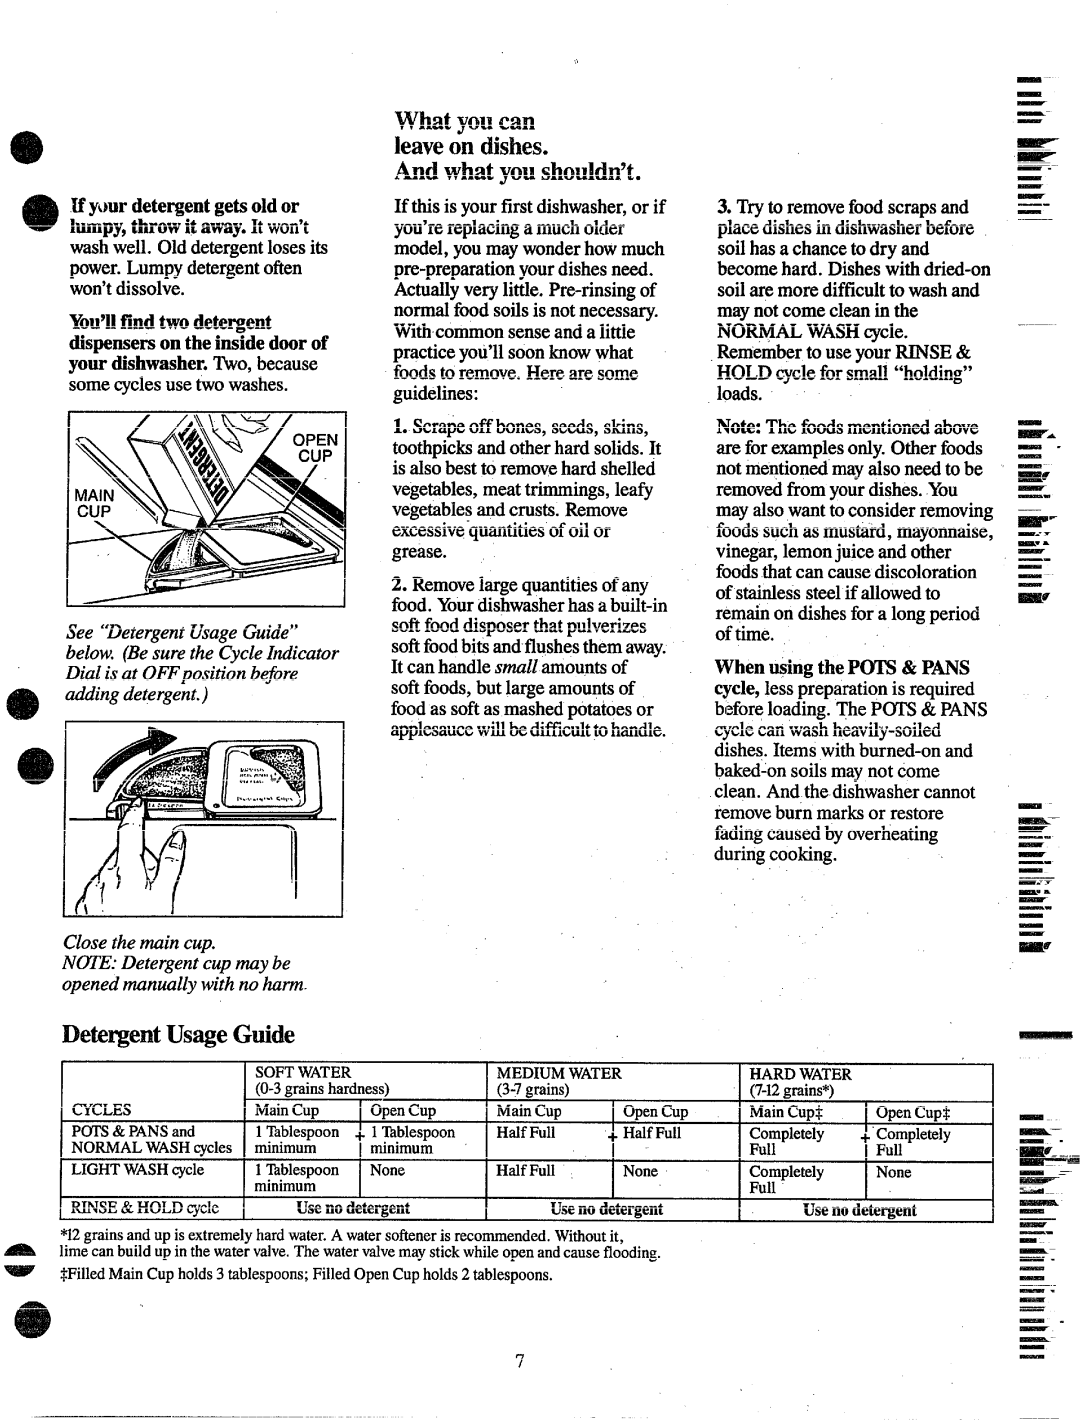 Hotpoint HDA-997 manual mat youcan leaveon tishes. AndwhatyoushouIdn9t, Dete~entUsageGuide 